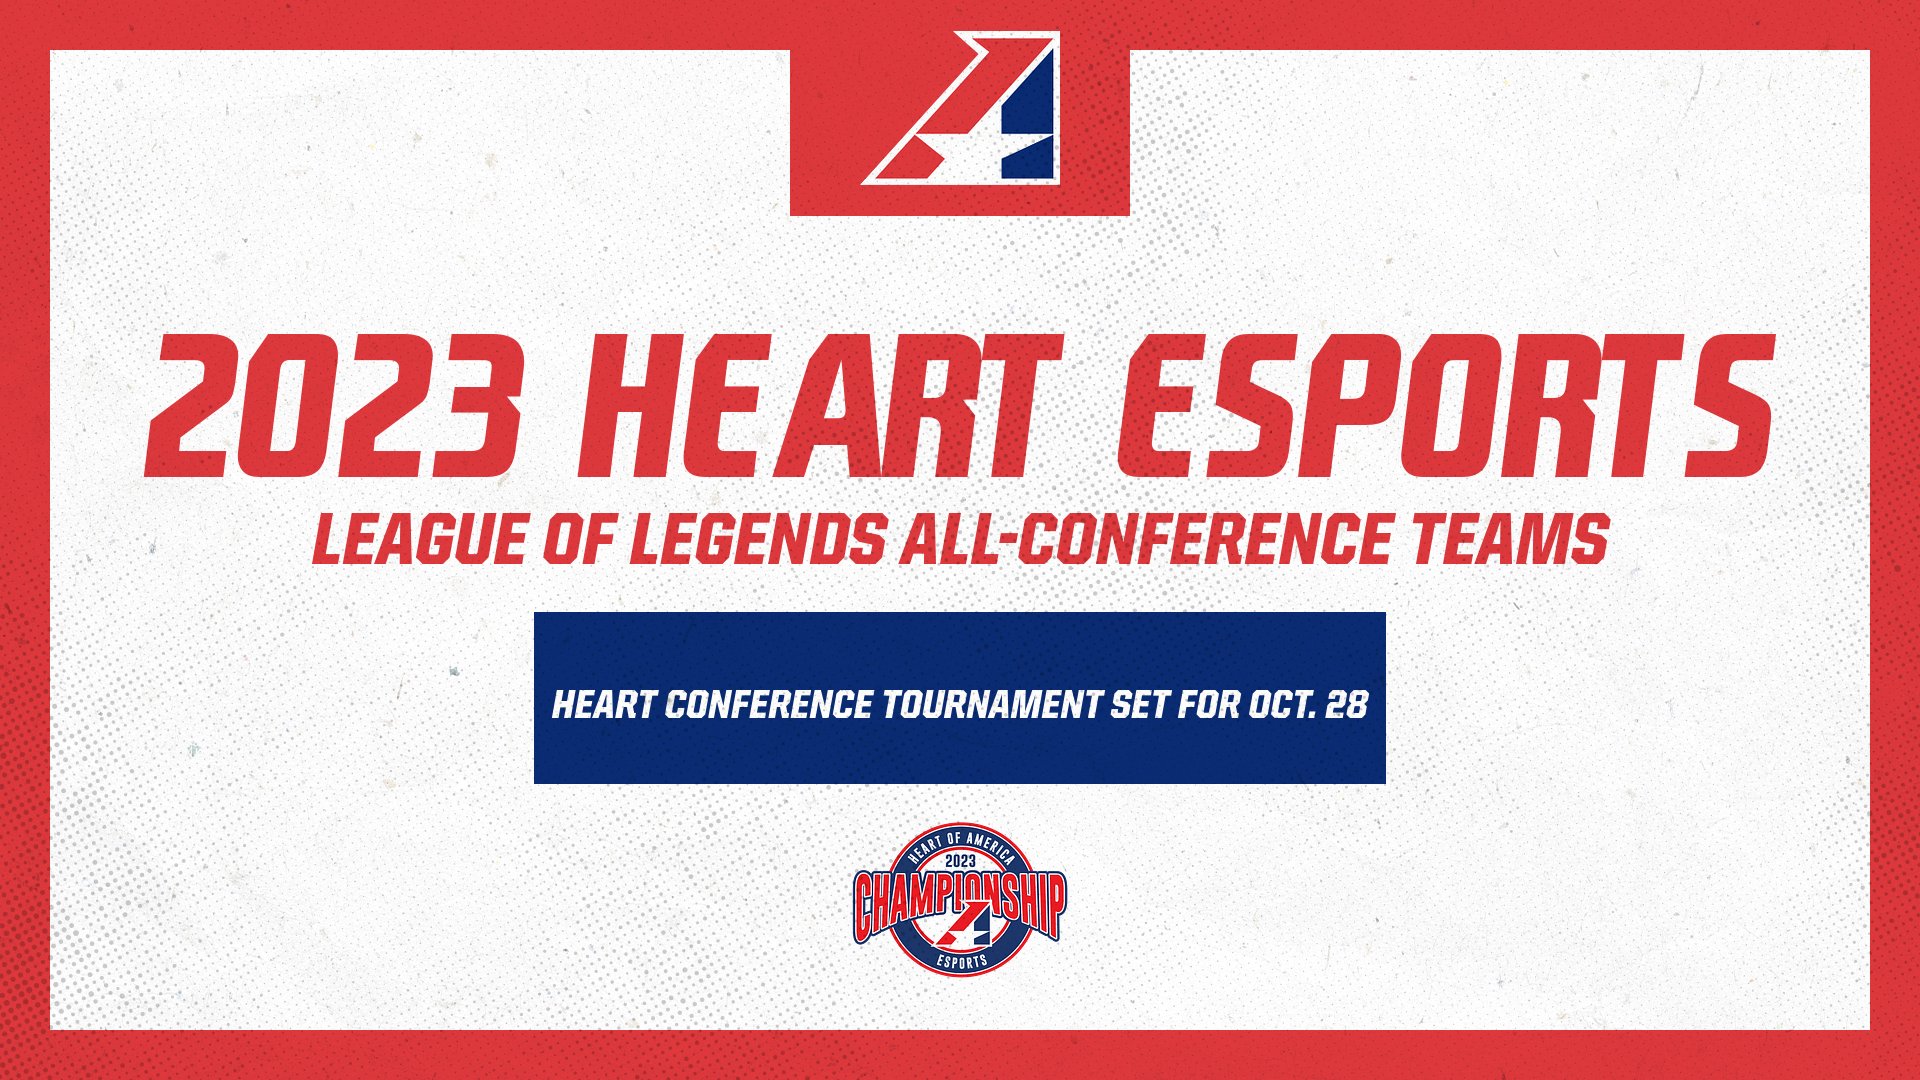 Heart Announces Inaugural Esports League of Legends All-Conference Team